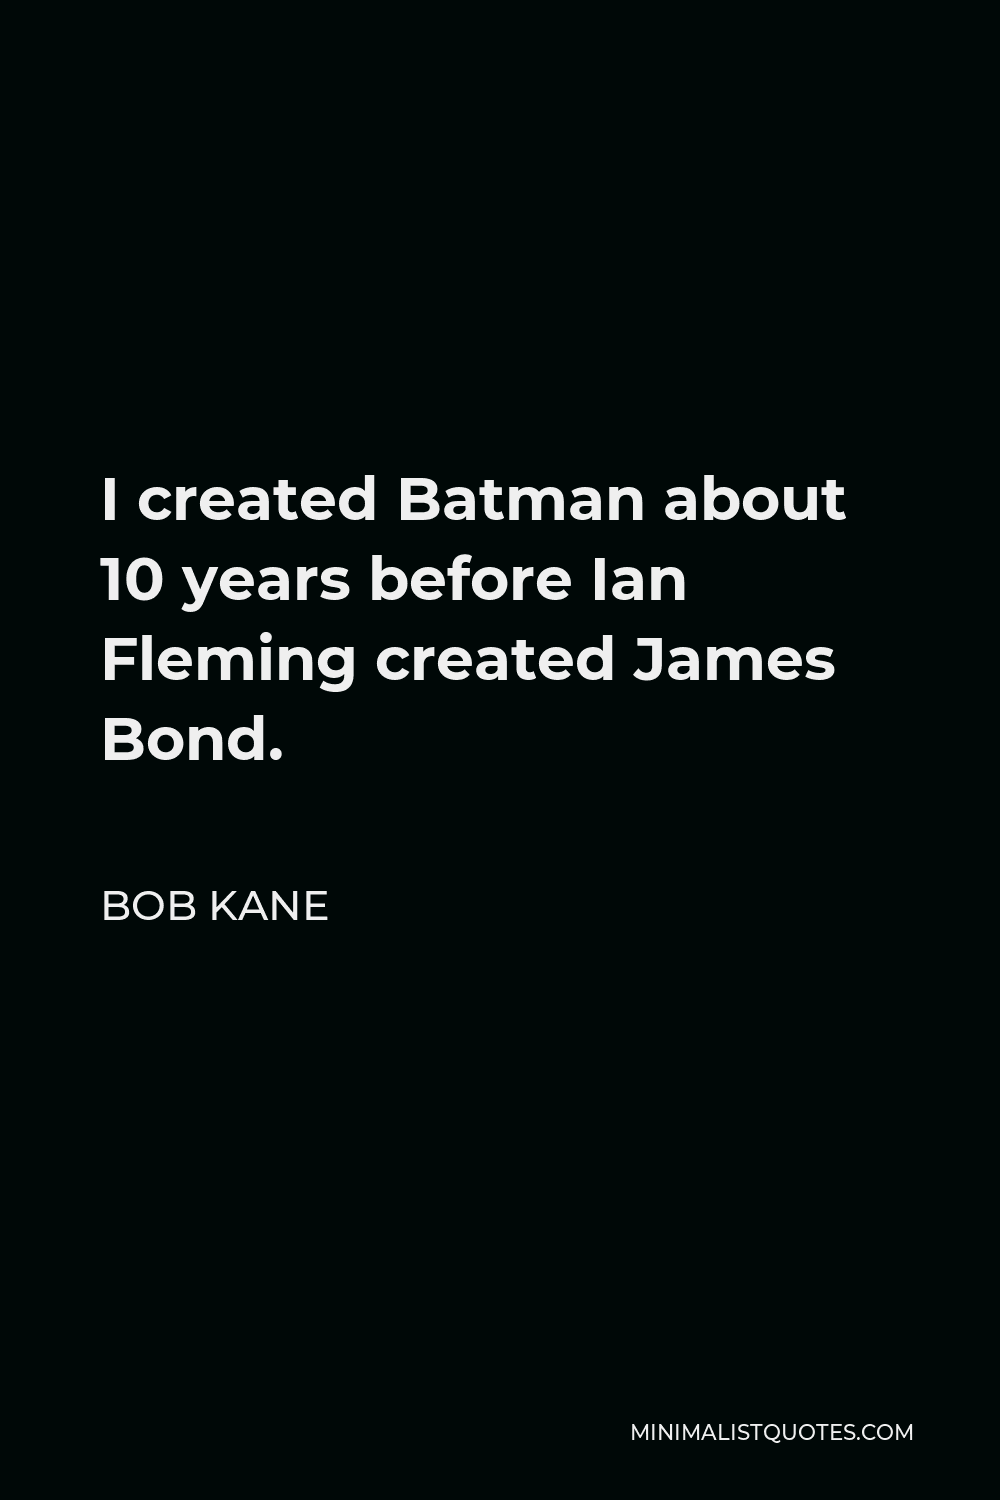 Bob Kane Quote - I created Batman about 10 years before Ian Fleming created James Bond.